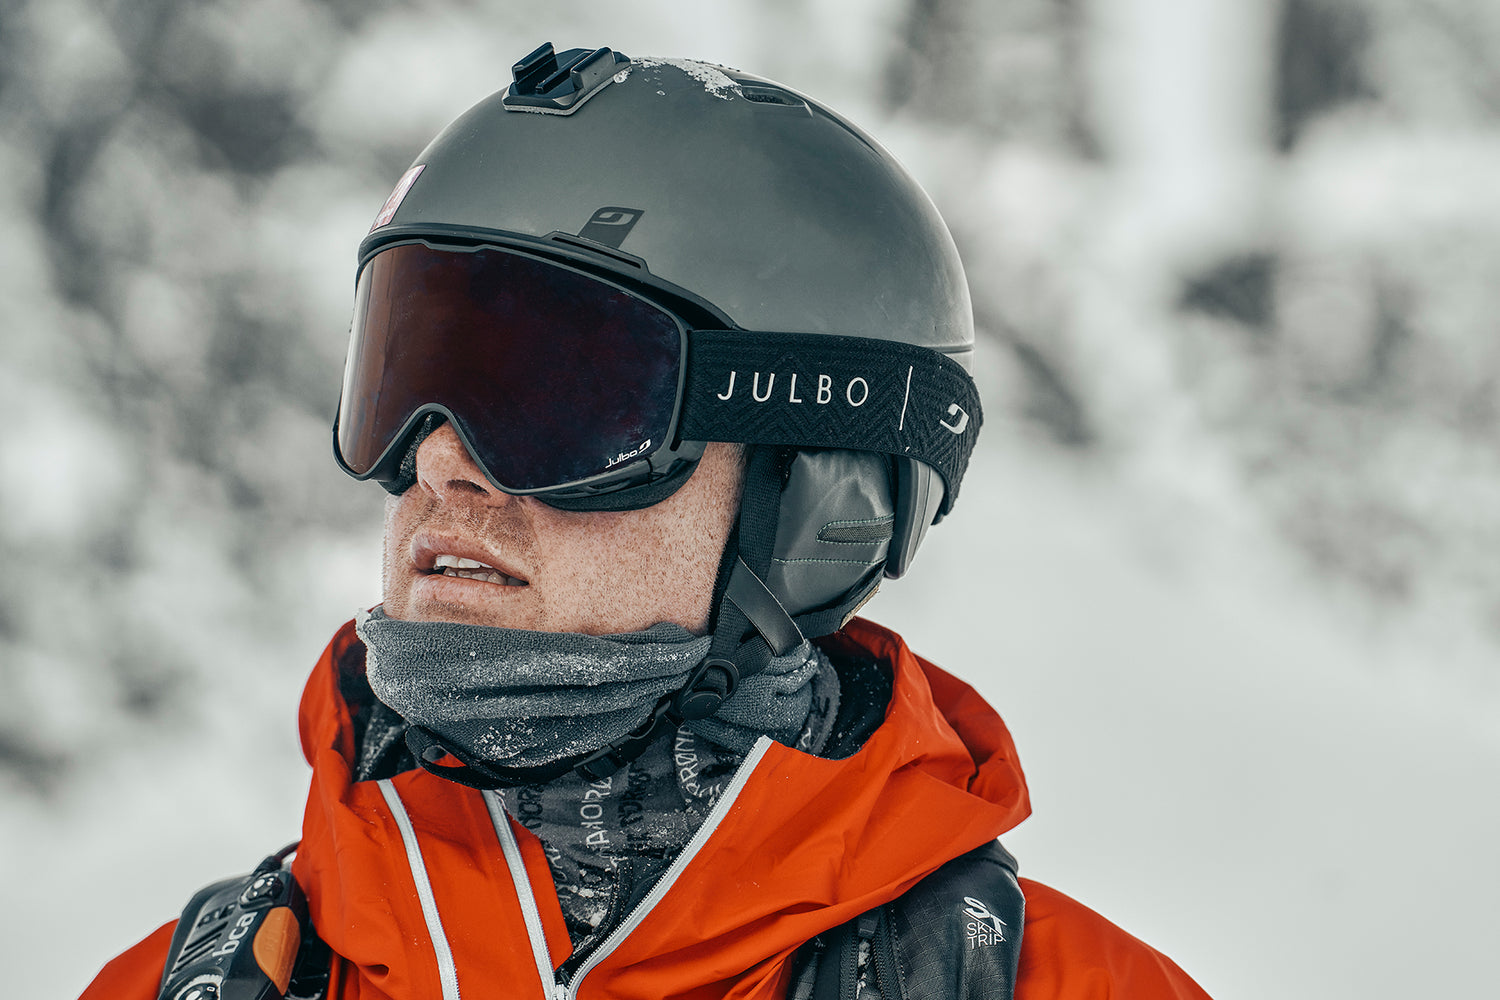 Top Goggle & Helmet Kits for Backcountry, Freeride, Resort and More